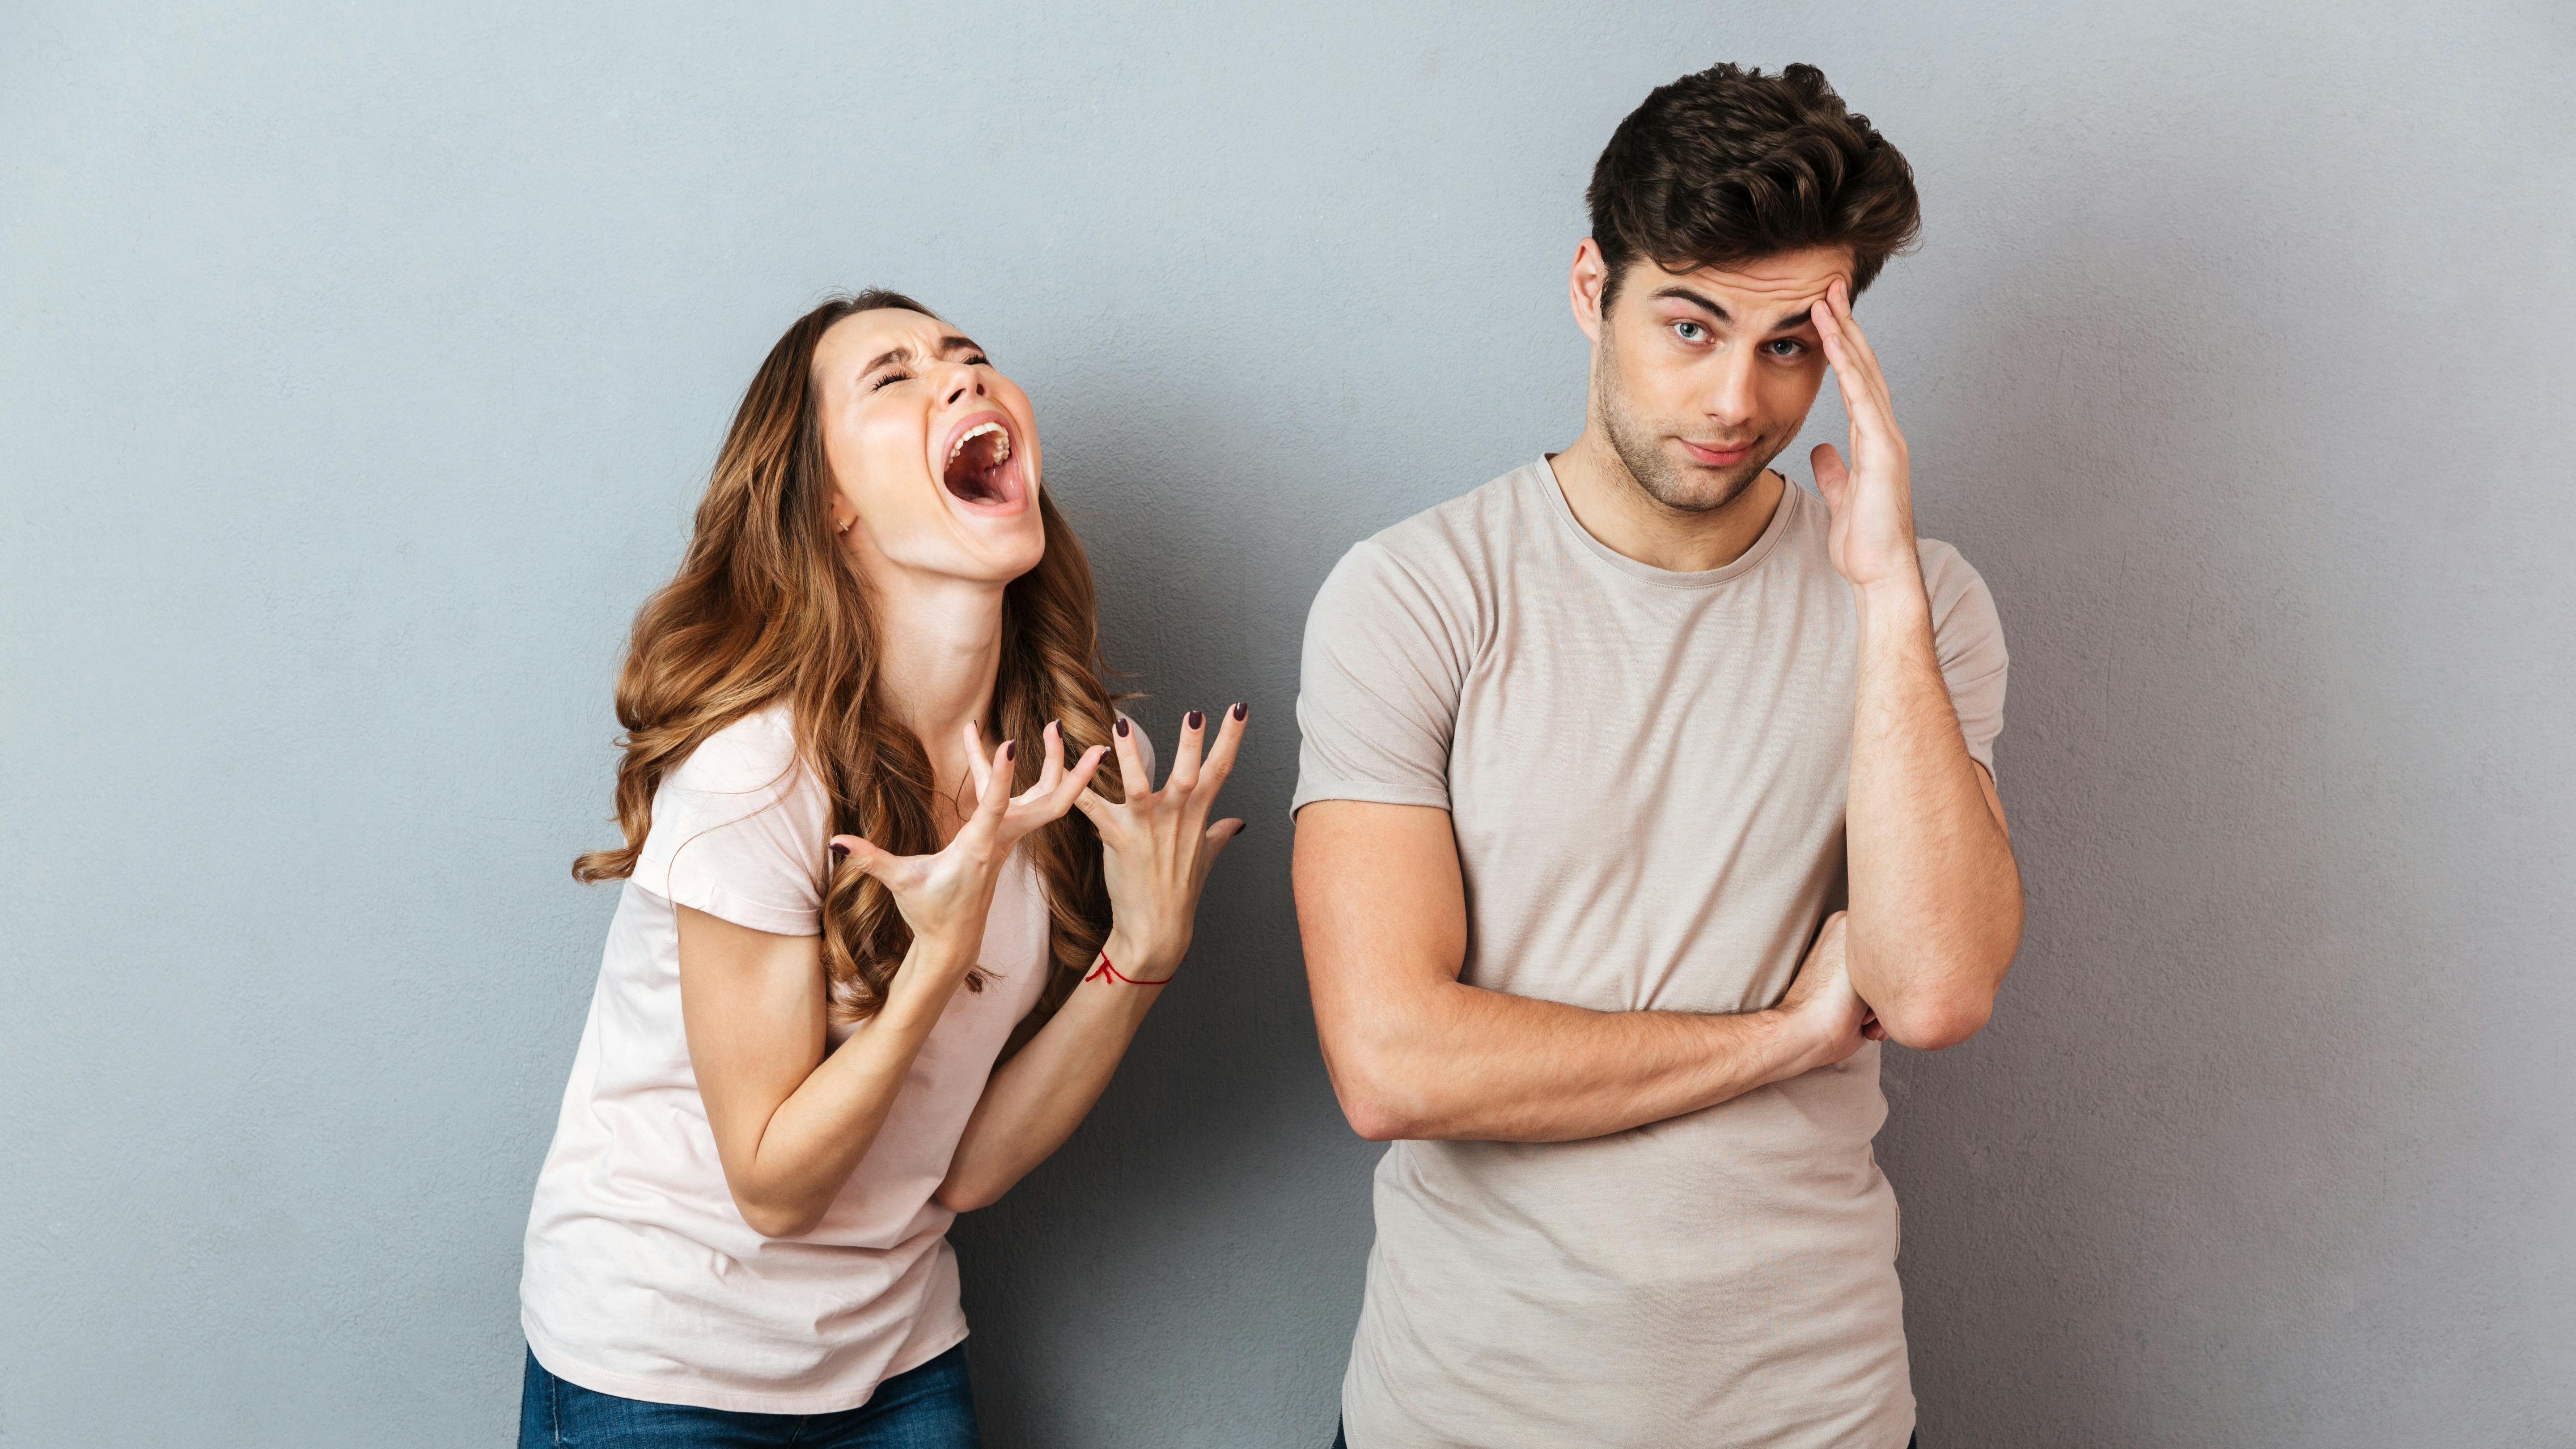 Portrait of a upset young couple having an argument and gesturing over gray wall